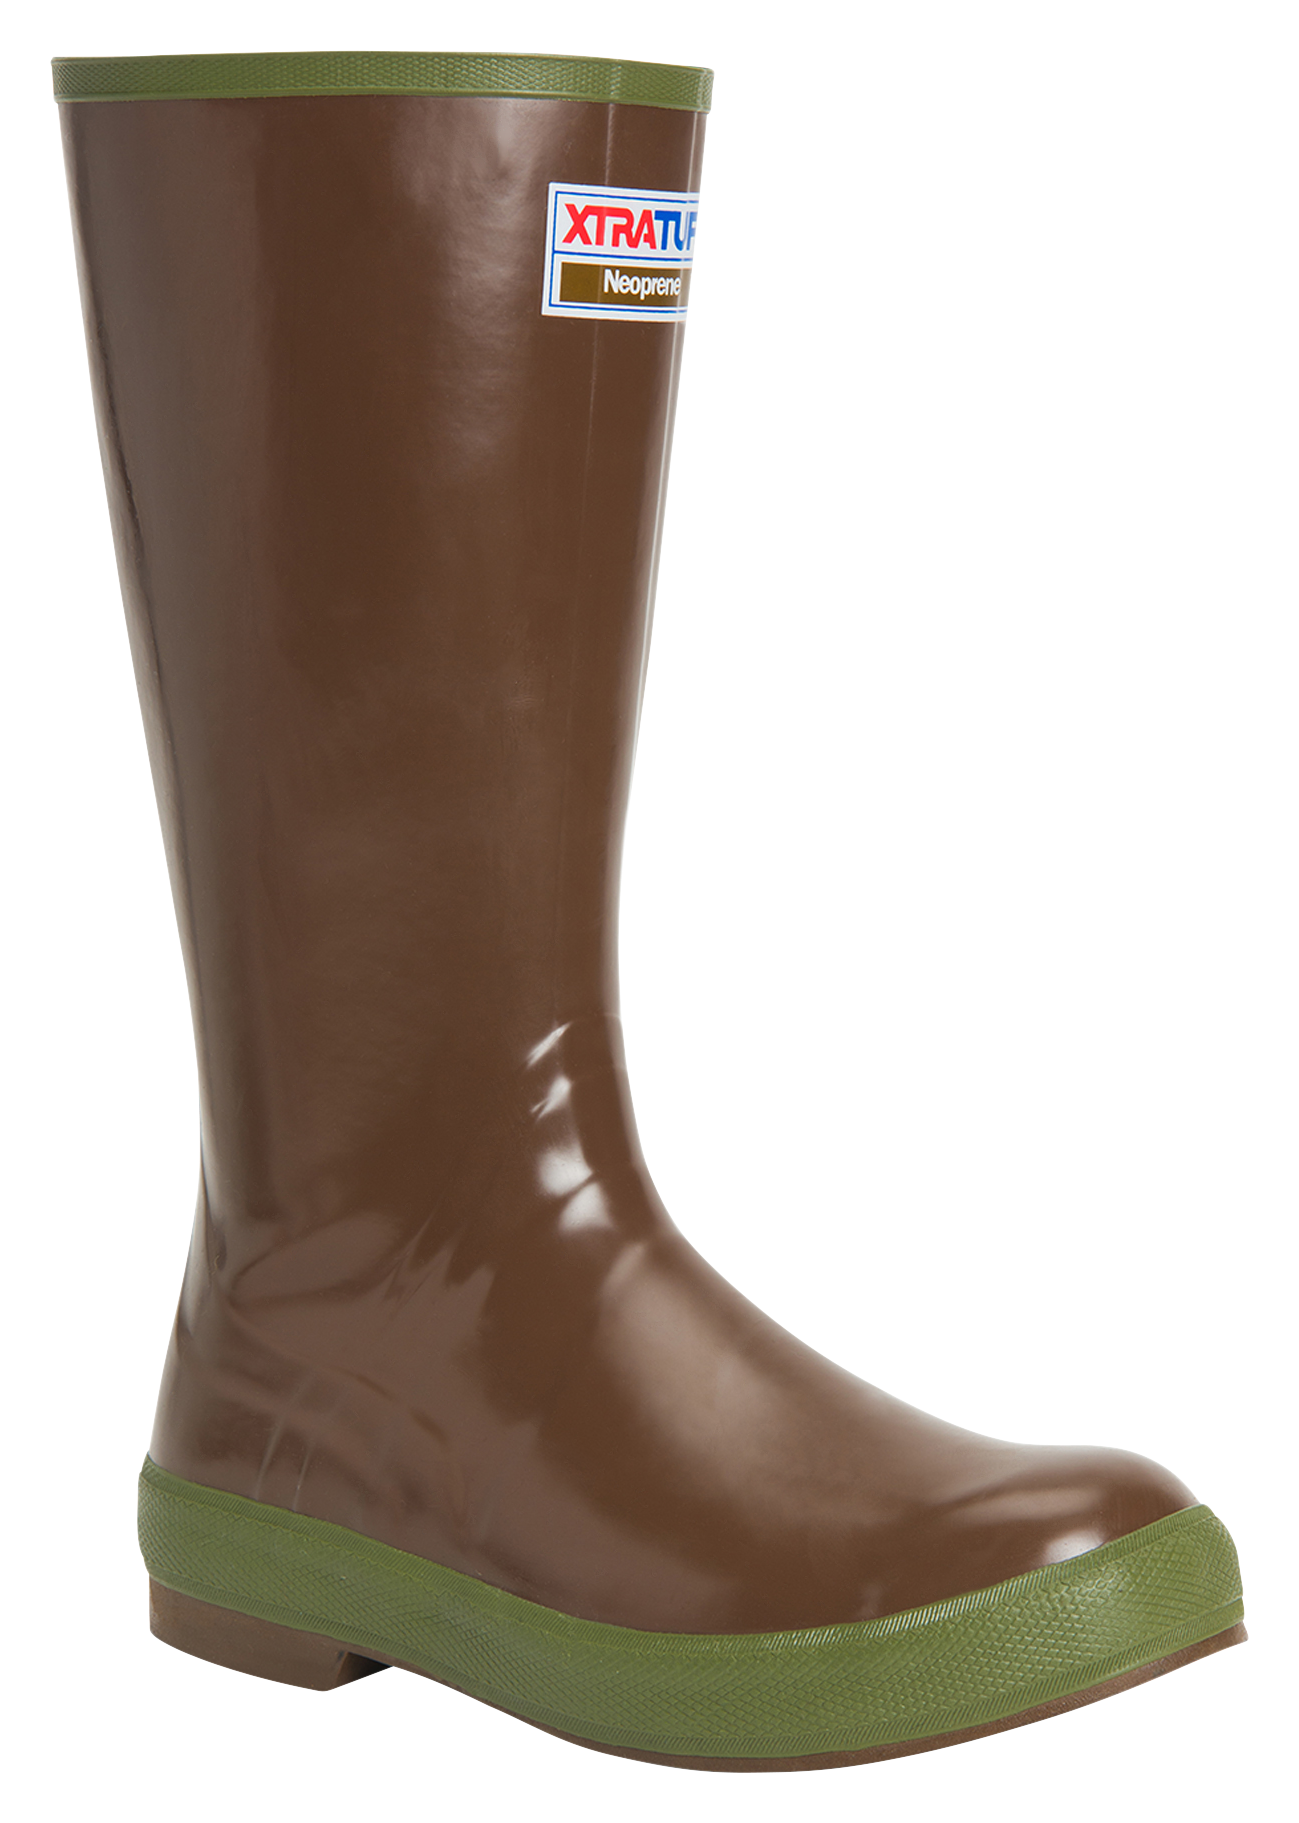 Xtratuf Legacy Rubber Boots for Men - Brown/Green - 8M